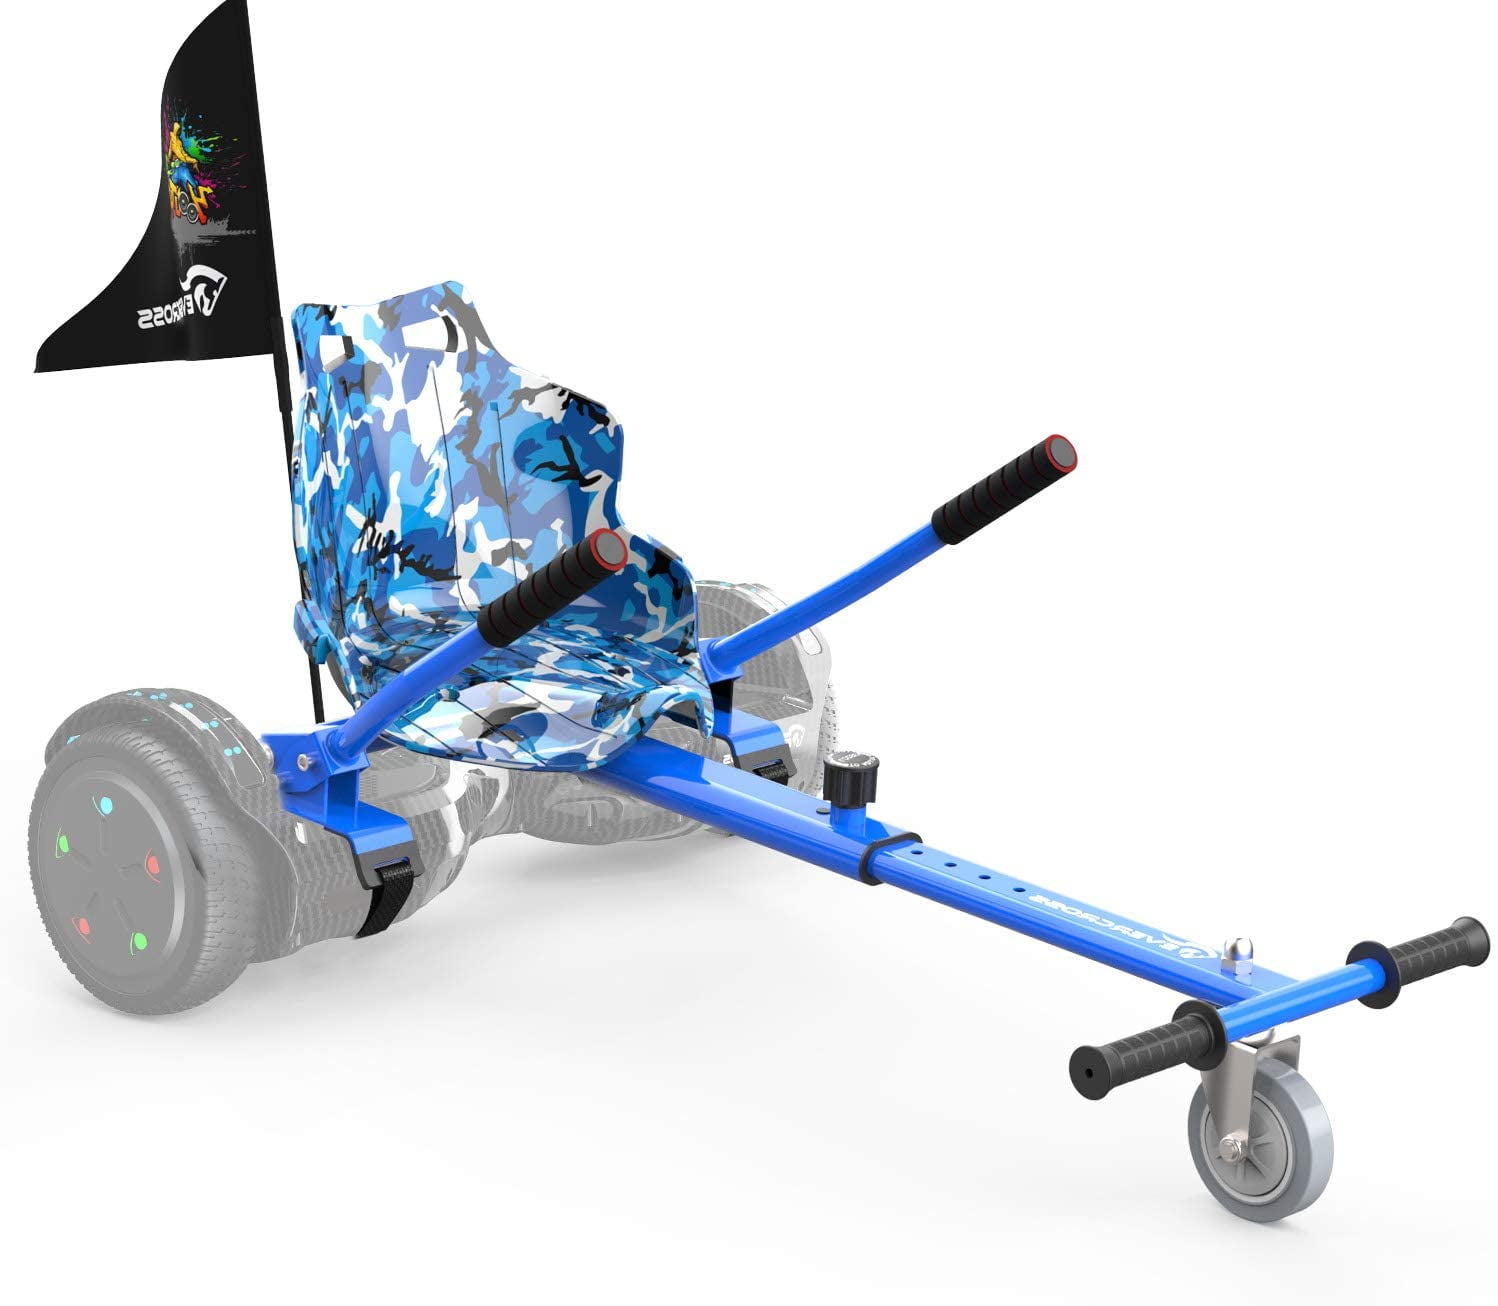 Hoverkart Frame Go Cart for Hoverboard Accessories Hover Cart Balance Scooter Seat Adjustable Length for 6.5 8 10inch Segway Blue Graffiti Galaxy Flame Camo 